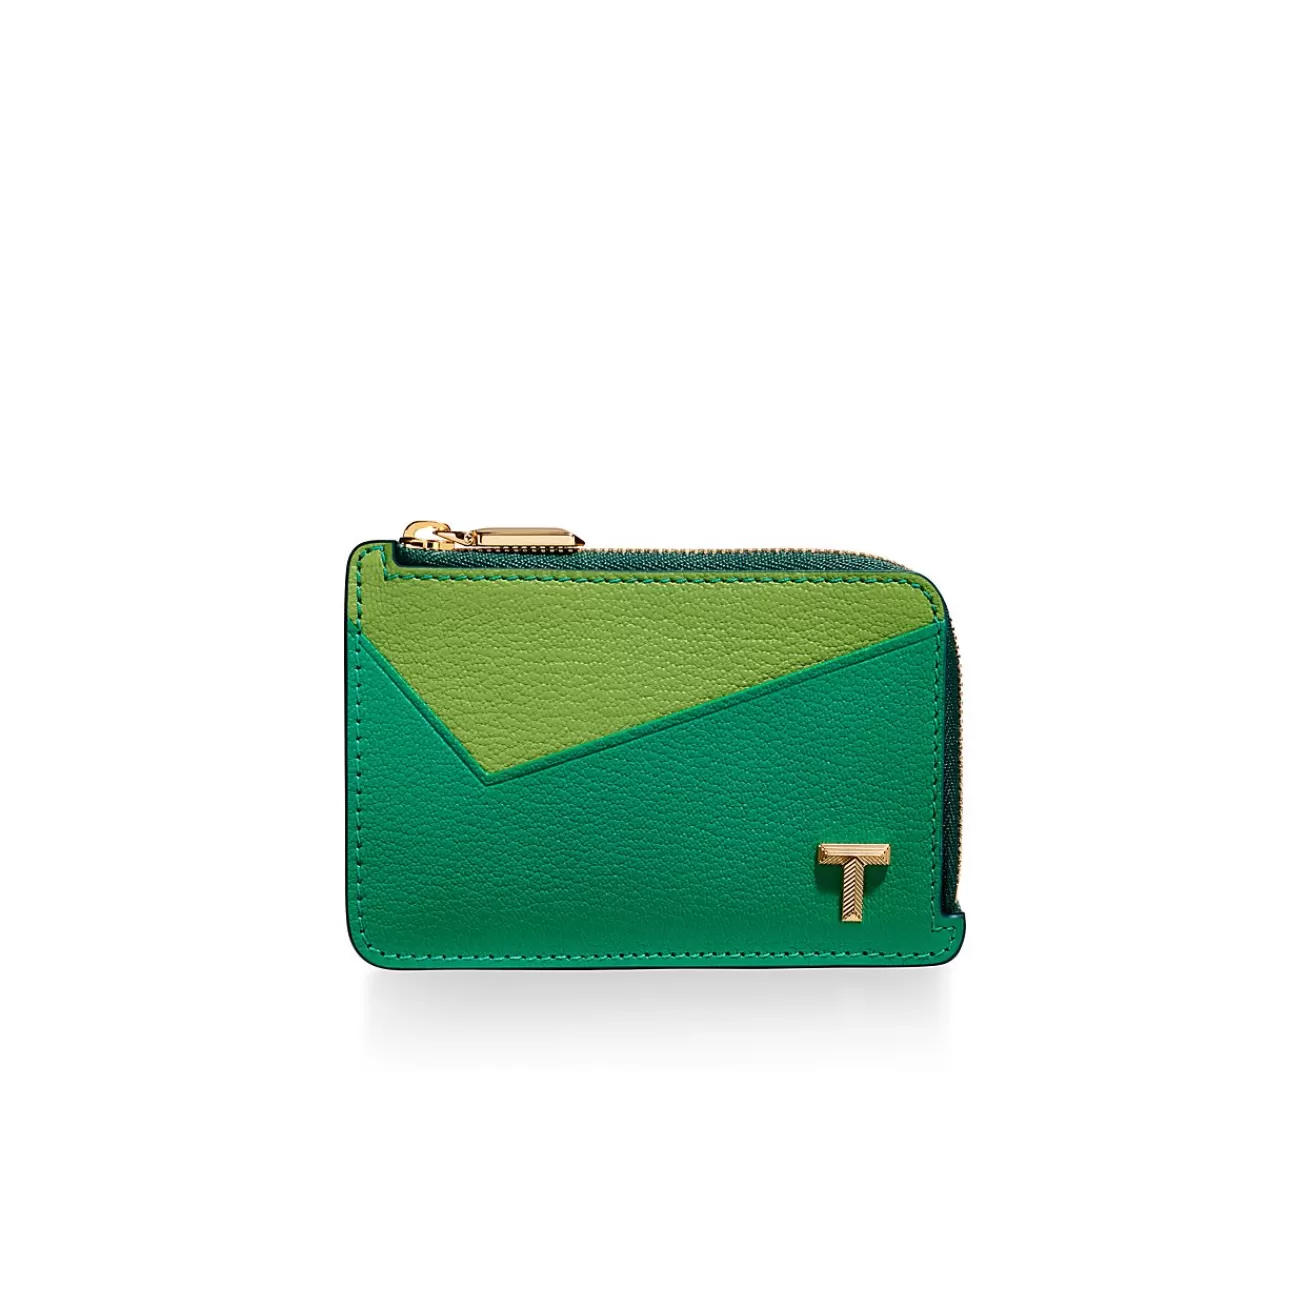 Tiffany & Co. Tiffany T Zip Card Case in Emerald Green Colorblock Leather | ^Women Small Leather Goods | Women's Accessories